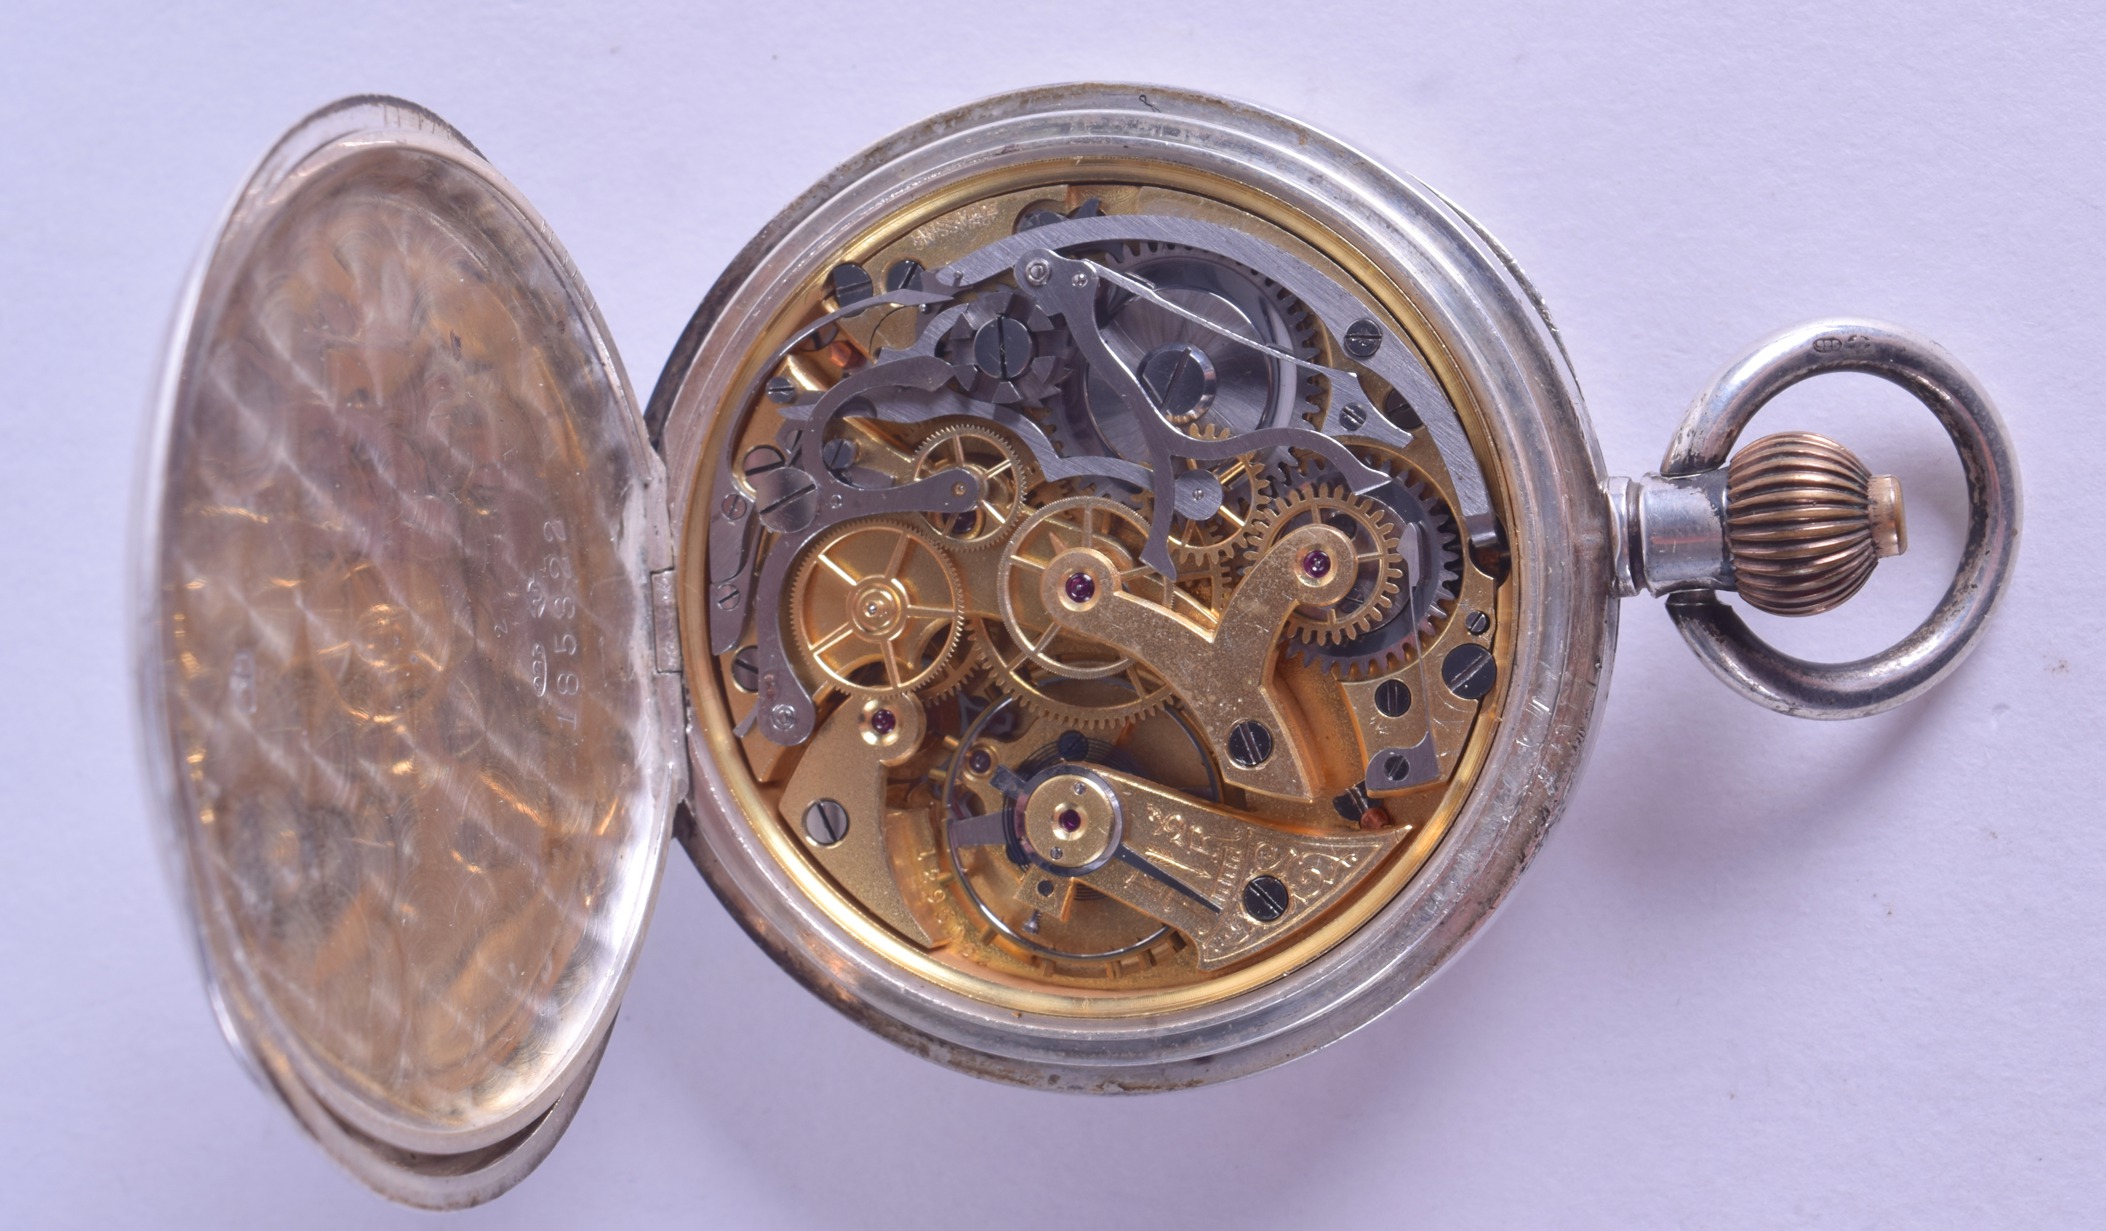 AN ANTIQUE CONTINENTAL SILVER CHONROMETER POCKET WATCH with white enamel dial and black numerals. - Image 2 of 3